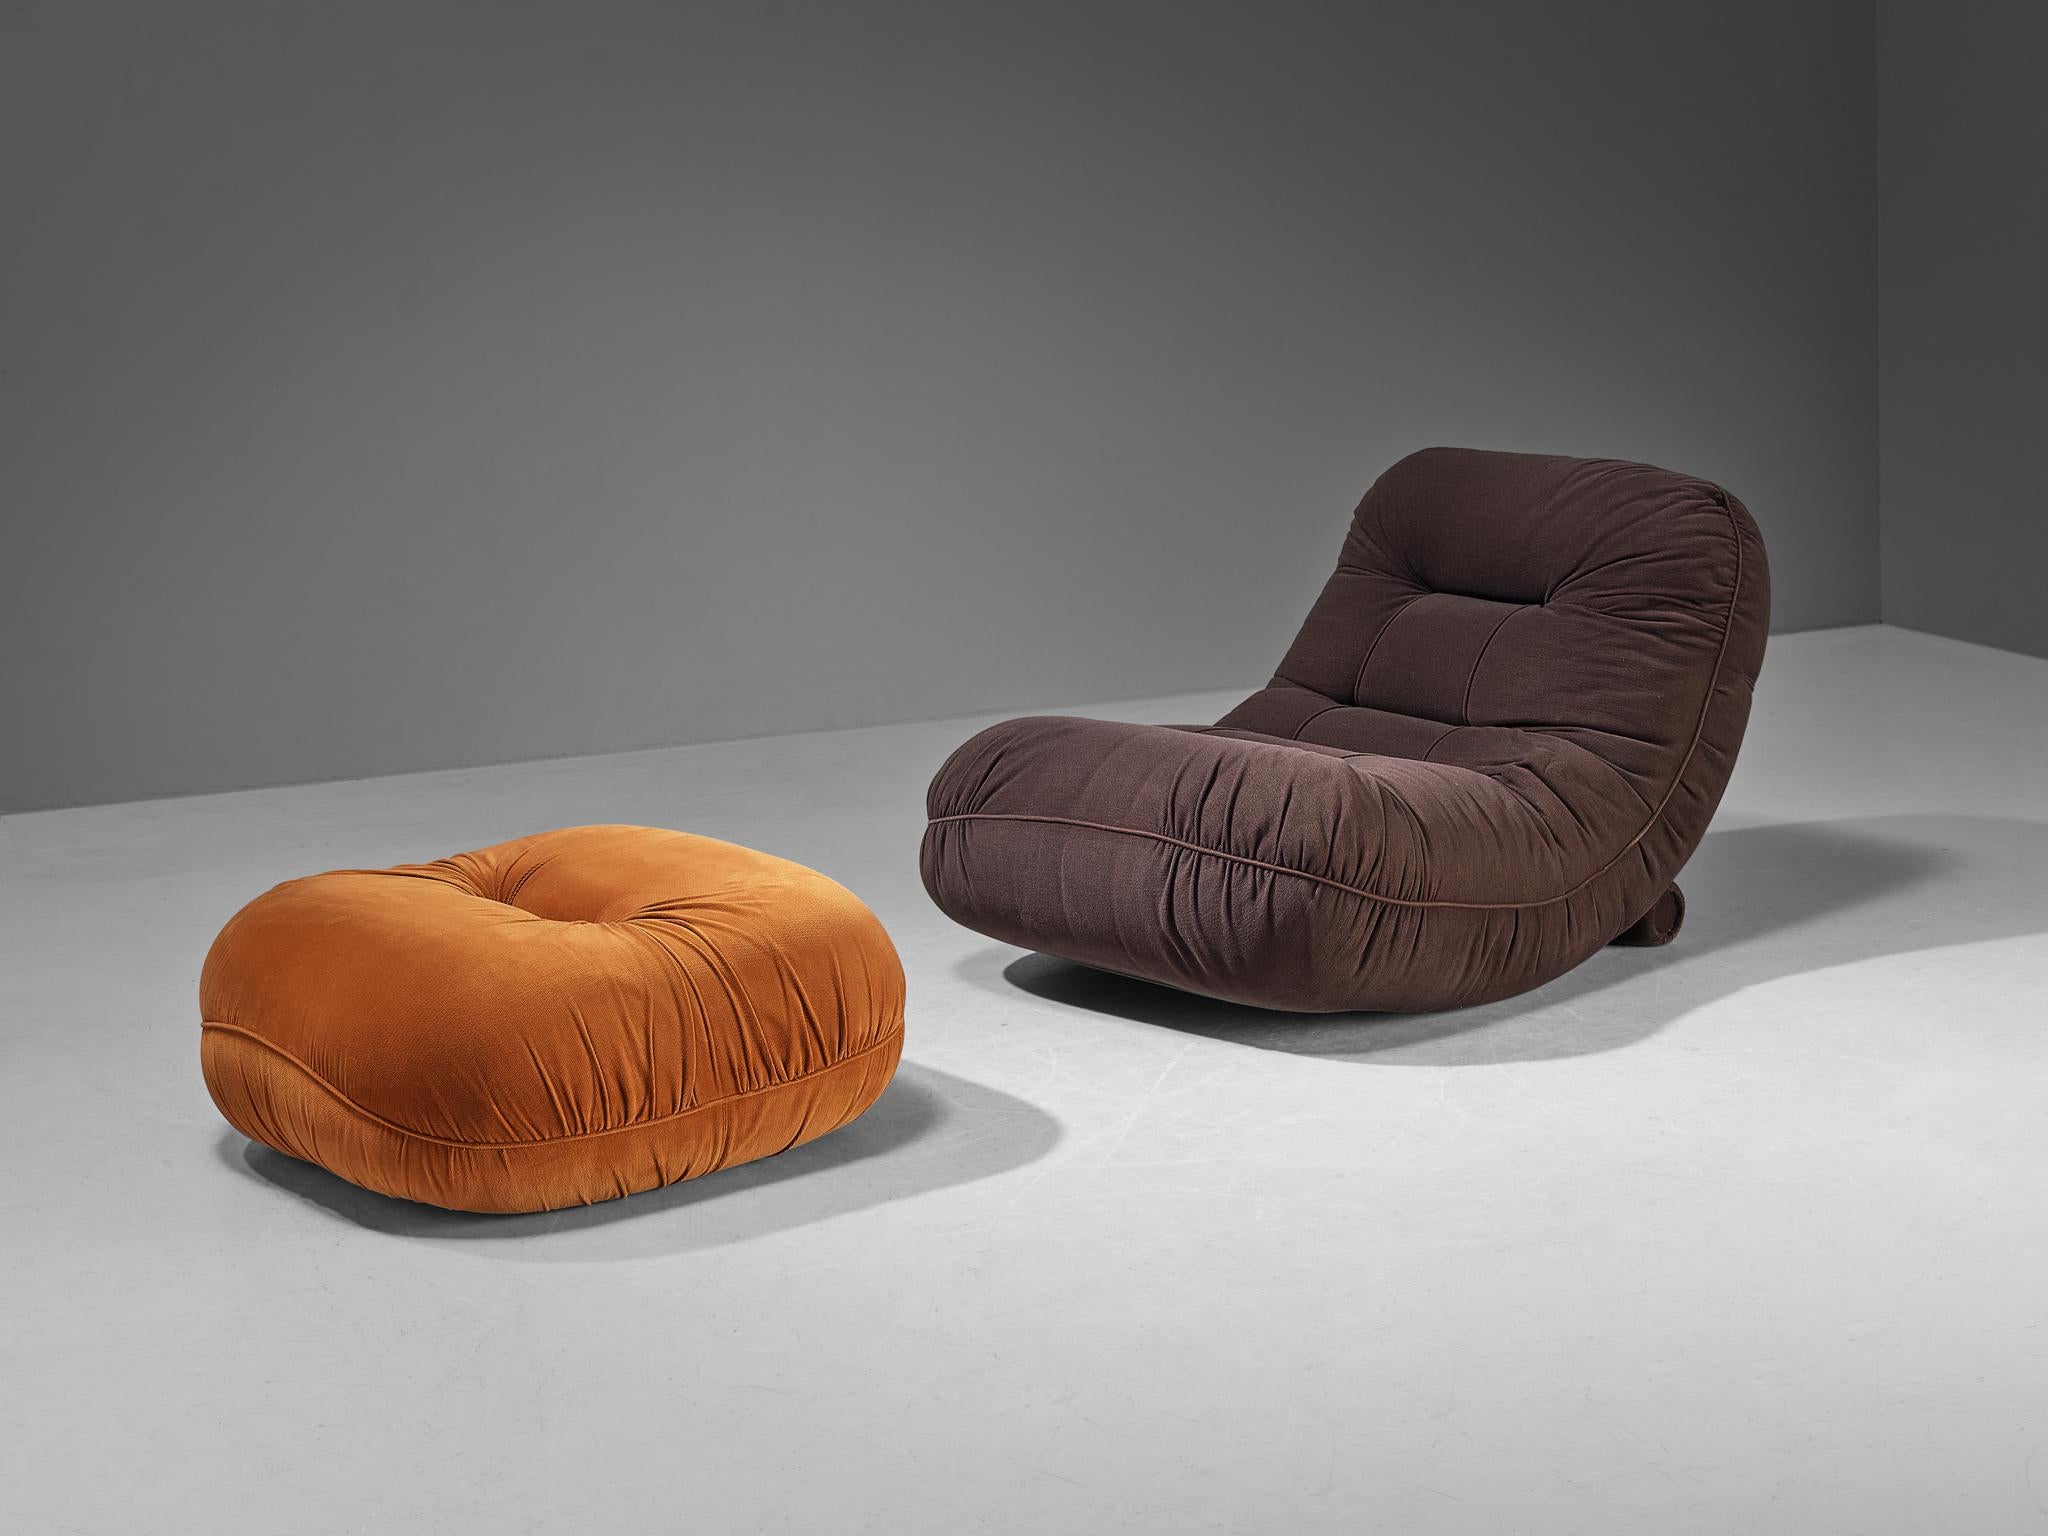 Adriano Piazzesi, 'Splash' lounge chair with ottoman, brown and orange fabric, stainless steel, Italy, 1973

The Italian designer Adriano Piazzesi aimed to create a piece of seating furniture that embraces utmost comfort, while still preserving an